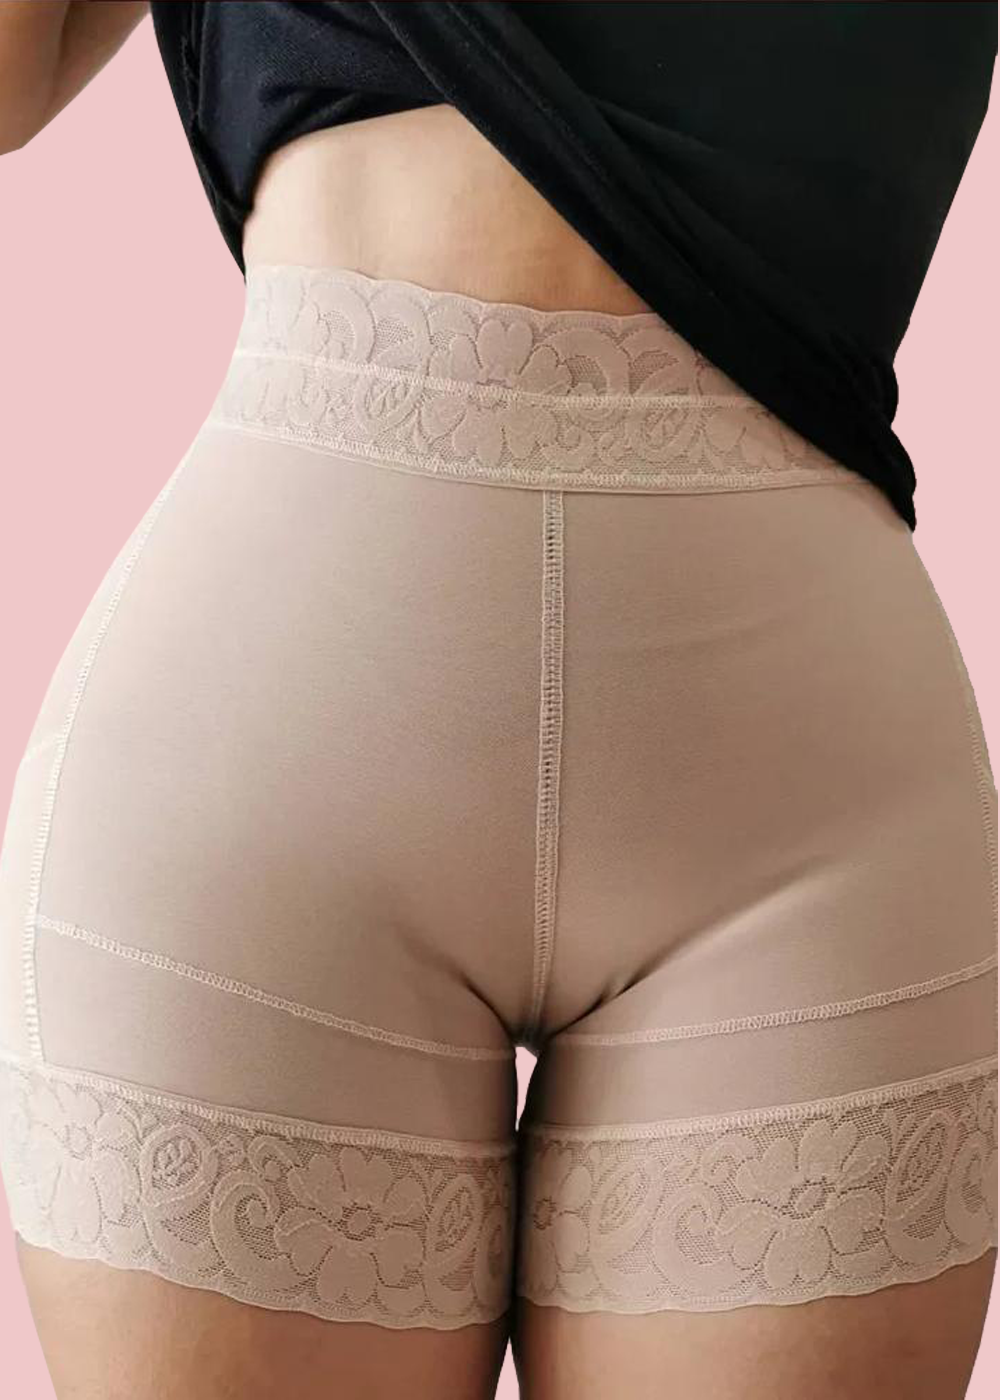 Postpartum Recovery Slimming Fajas Lace Butt Lifter 